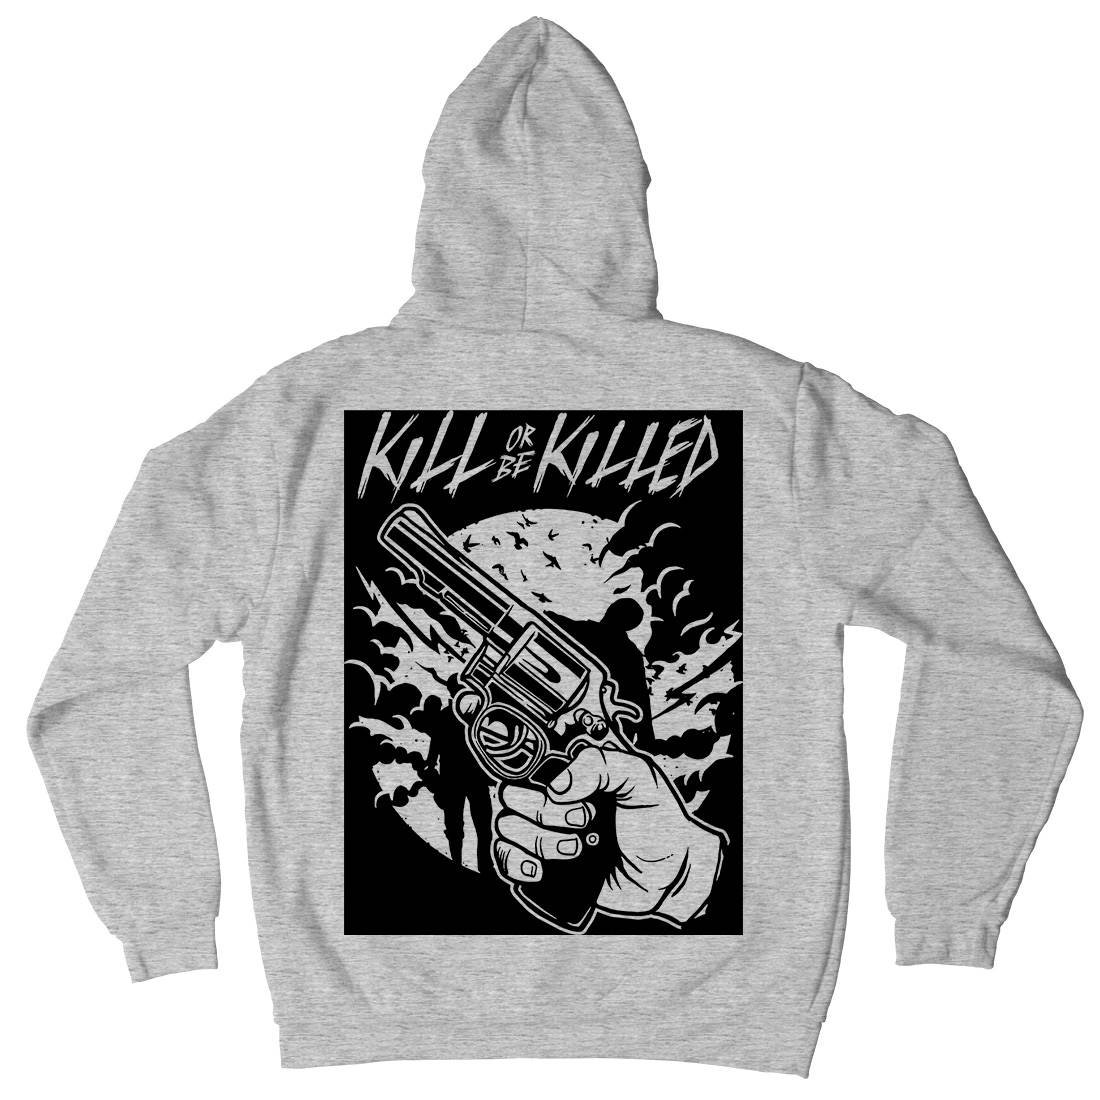 Zombie Shooter Kids Crew Neck Hoodie Horror A596